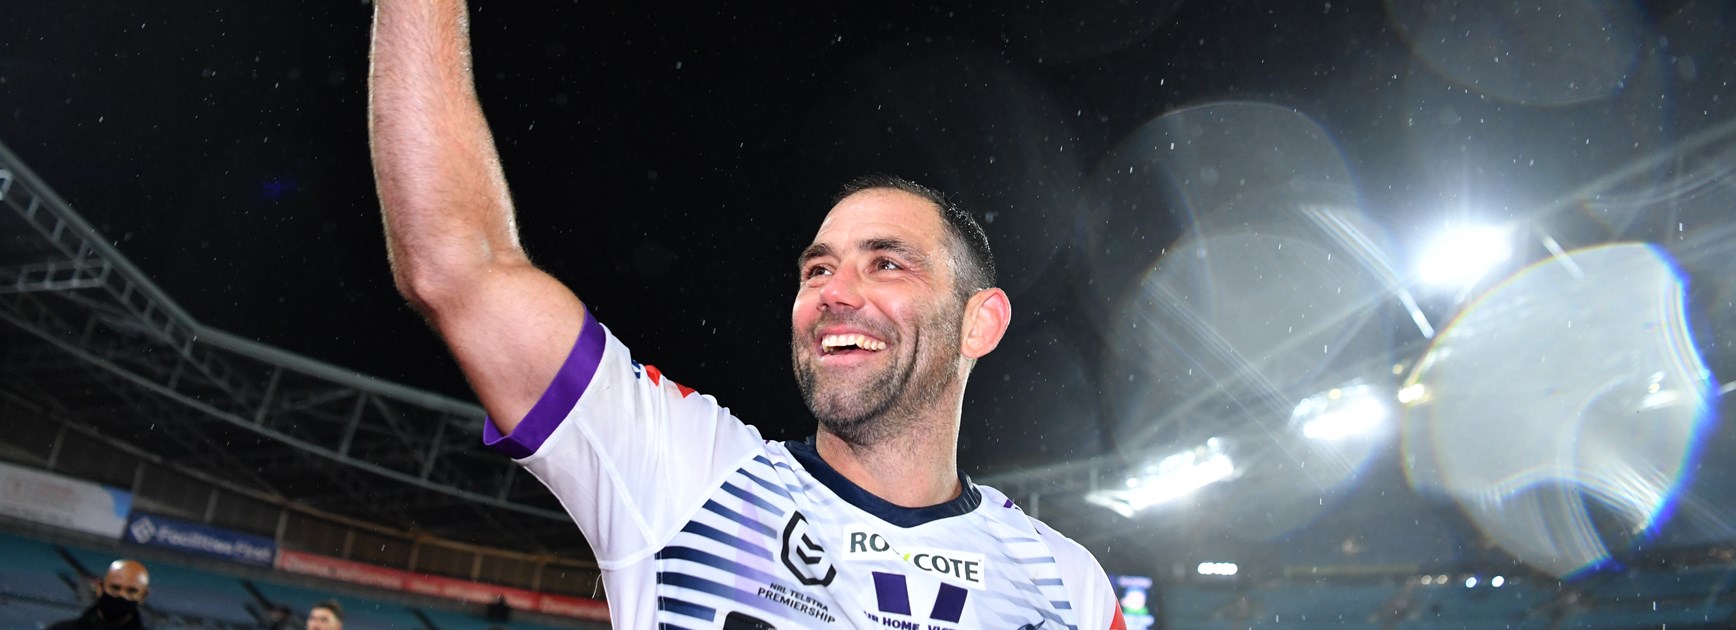 AAMI Park stand tribute for Cameron Smith